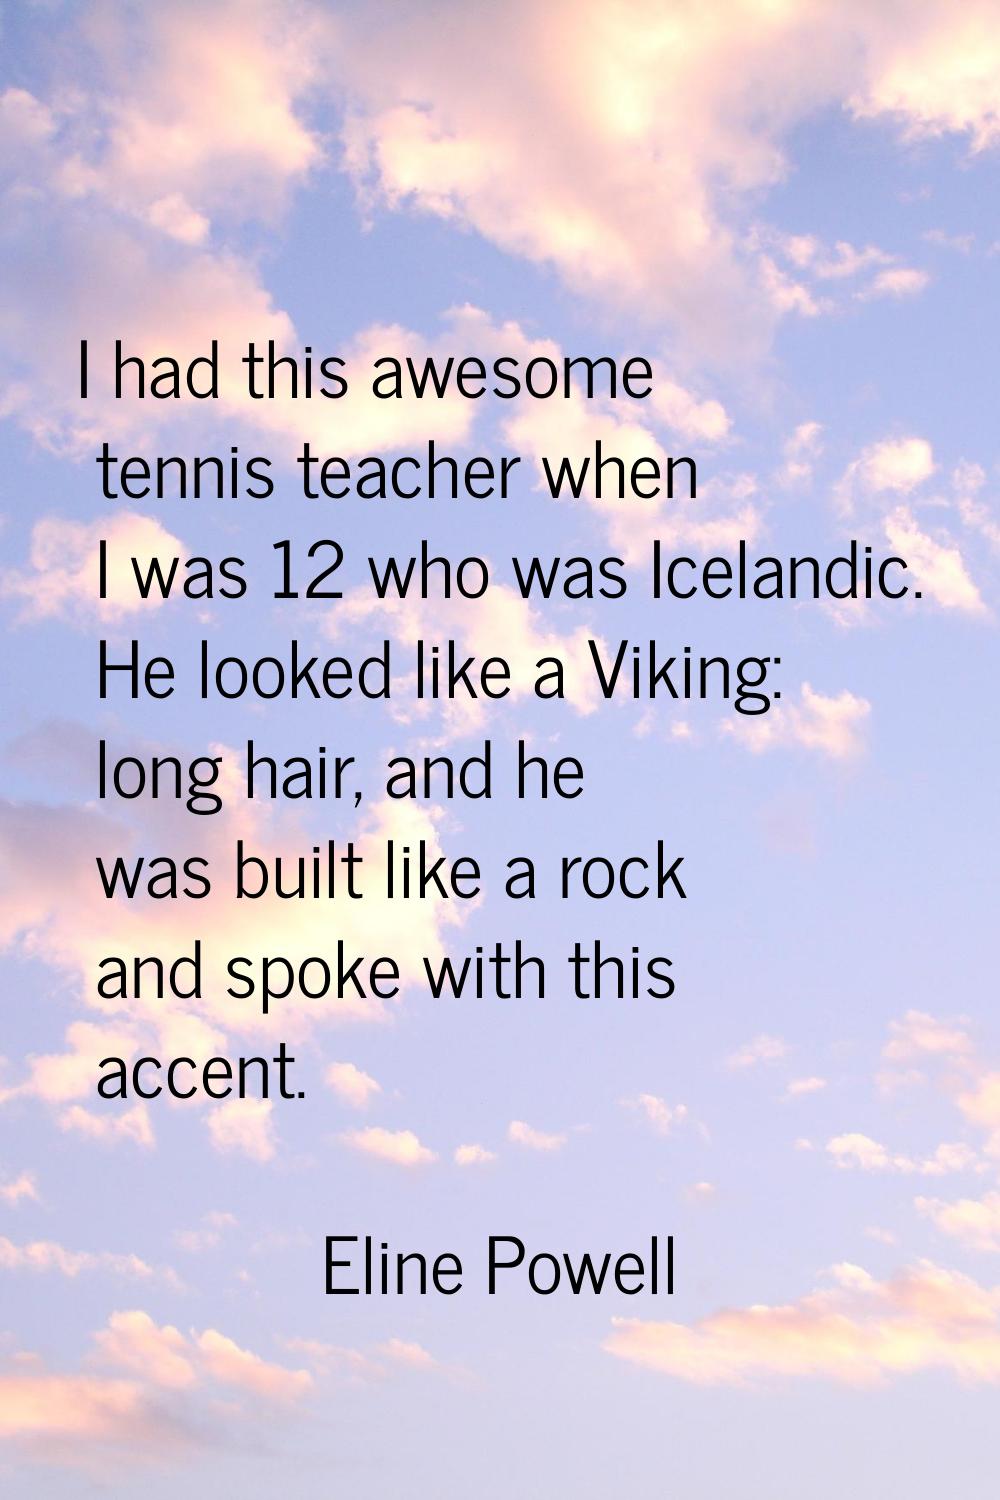 I had this awesome tennis teacher when I was 12 who was Icelandic. He looked like a Viking: long ha